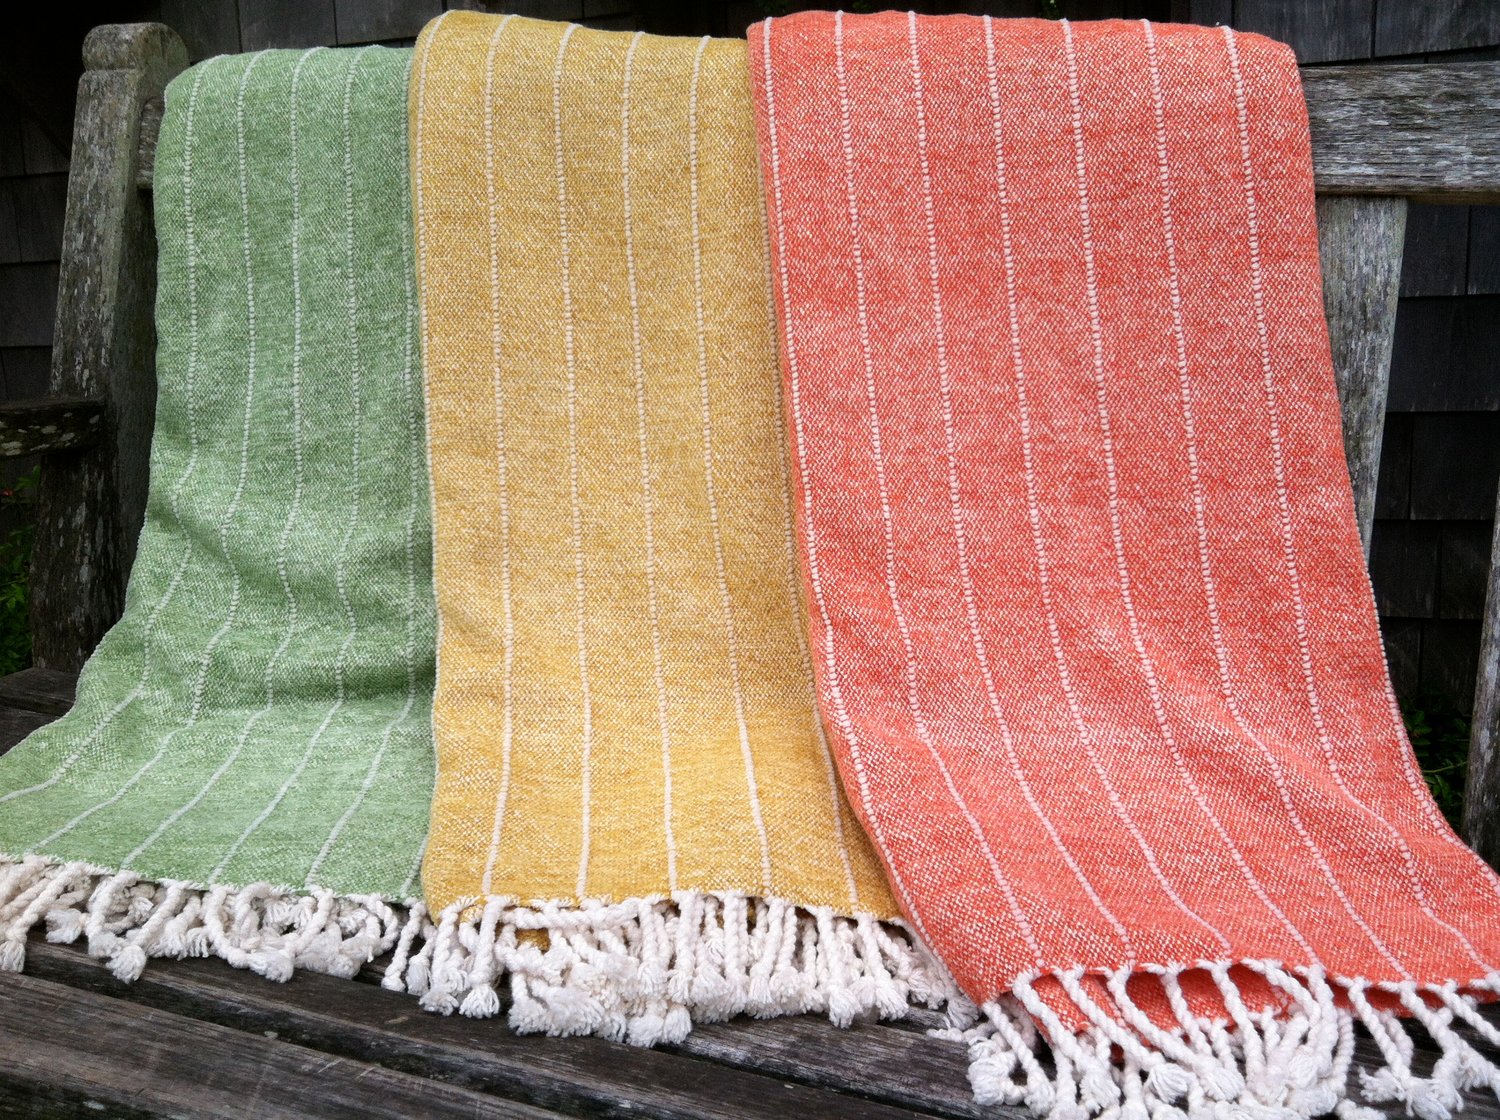 A brightly-colored array of Karin Sheppard’s popular throws.